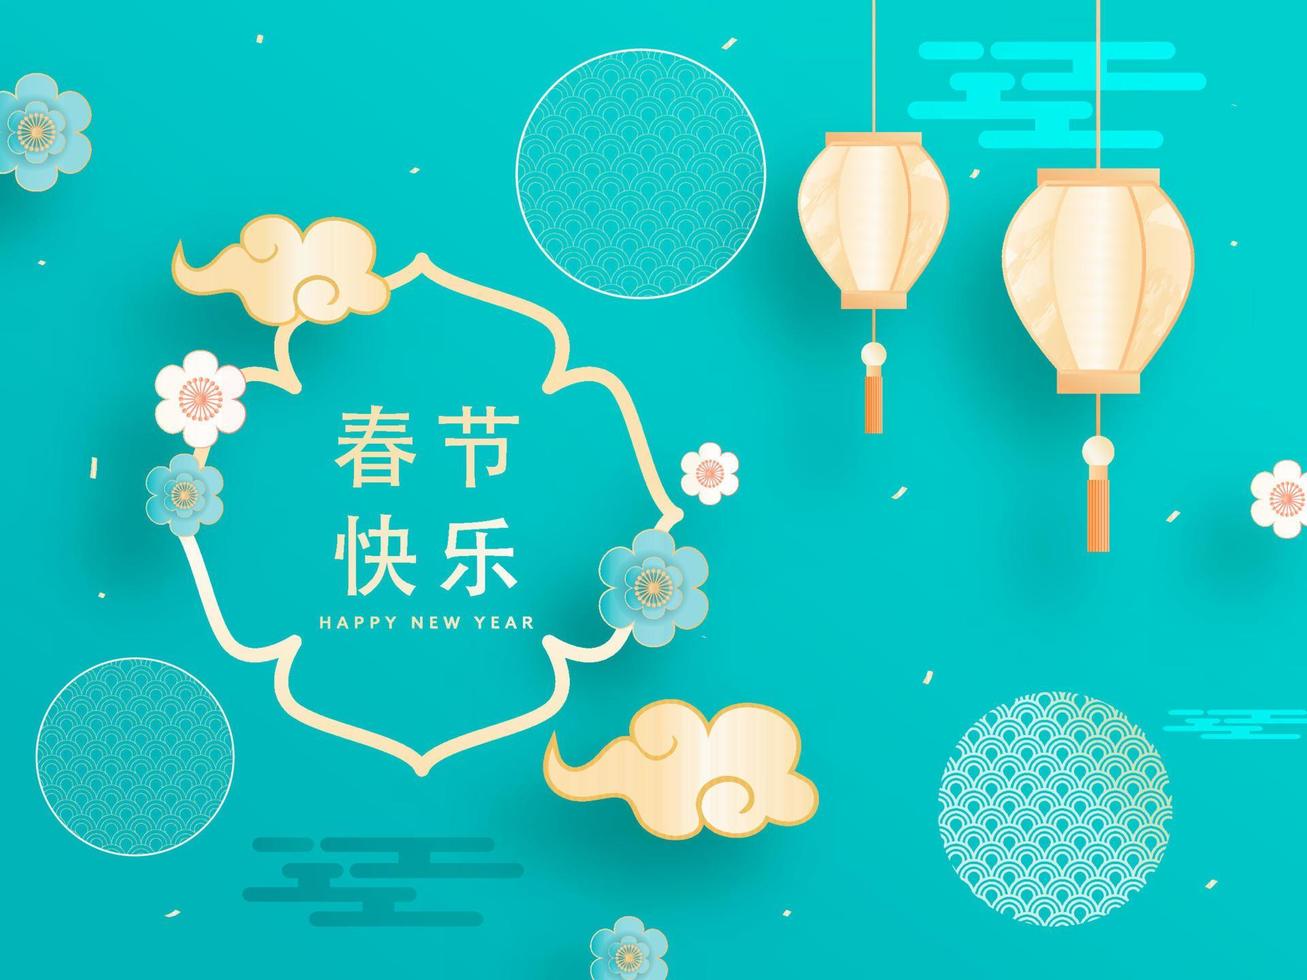 Golden Happy New Year Text In Chinese Language With Paper Flowers, Clouds And Hanging Lanterns On Turquoise Background. vector